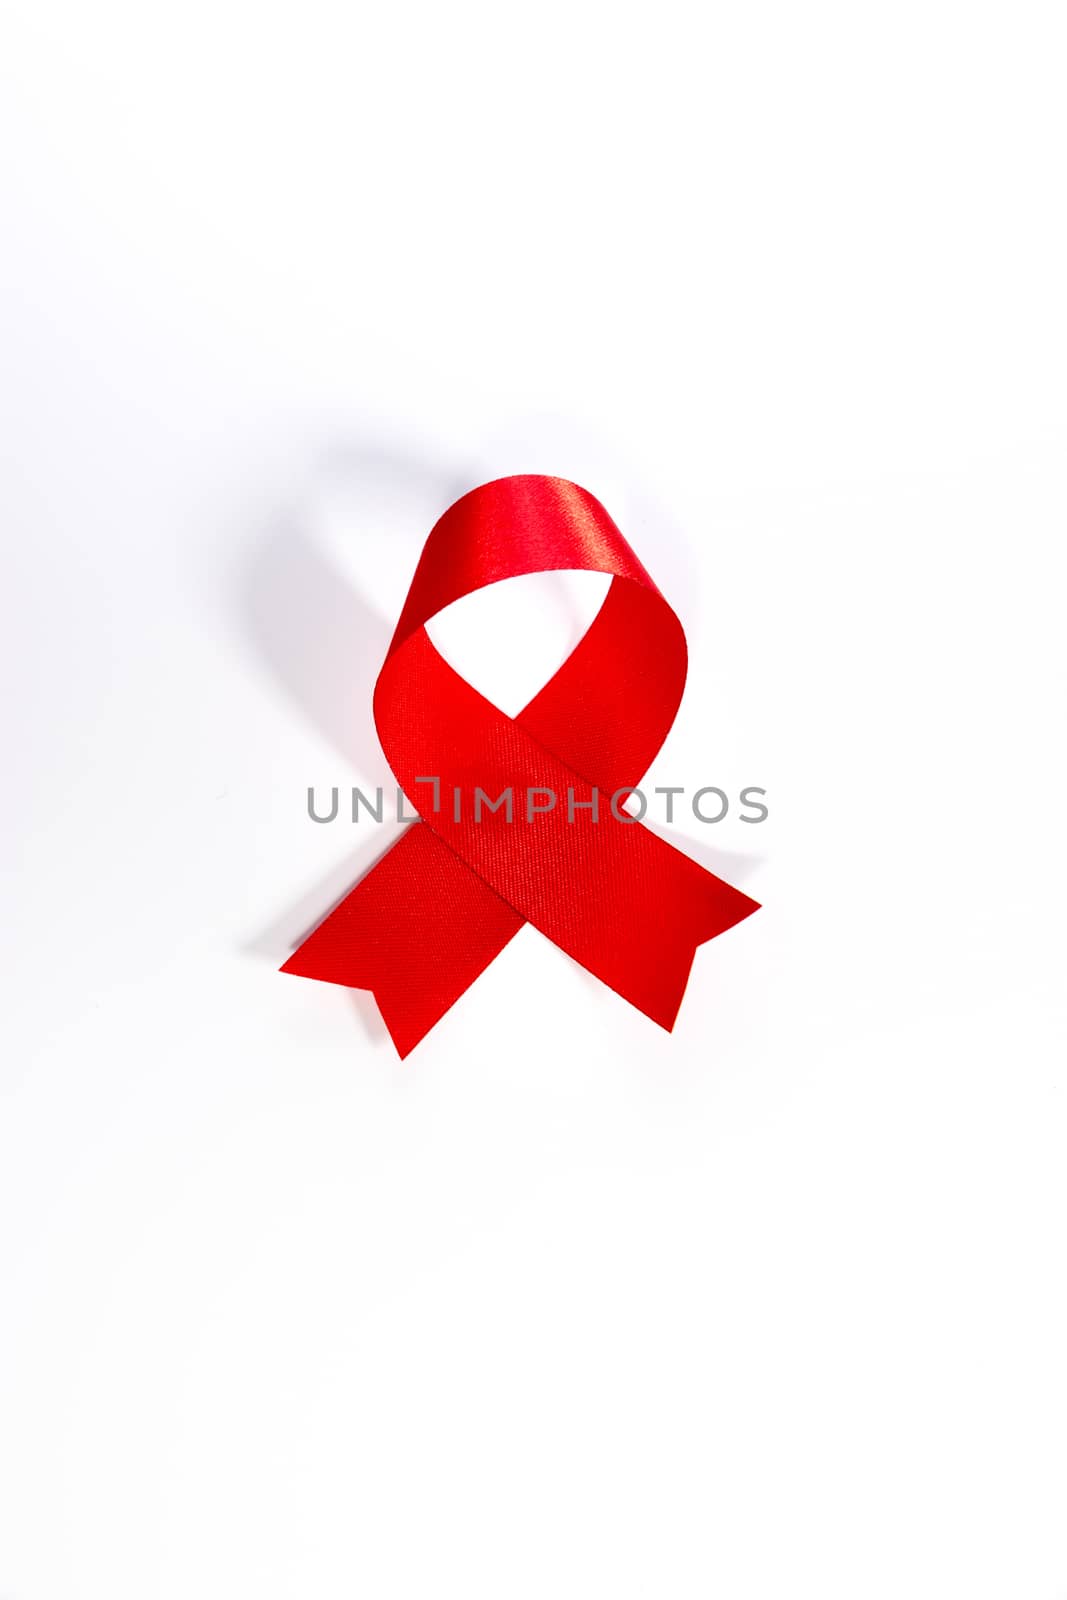 World aids day.Red Aids ribbon.World AIDS Day 1 December. Red AIDS ribbon isolated on white background with shadow. AIDS icon.AIDS awareness. HIV & STI. AIDS logo. AIDS symbol. HIV symbol.HIV disease.